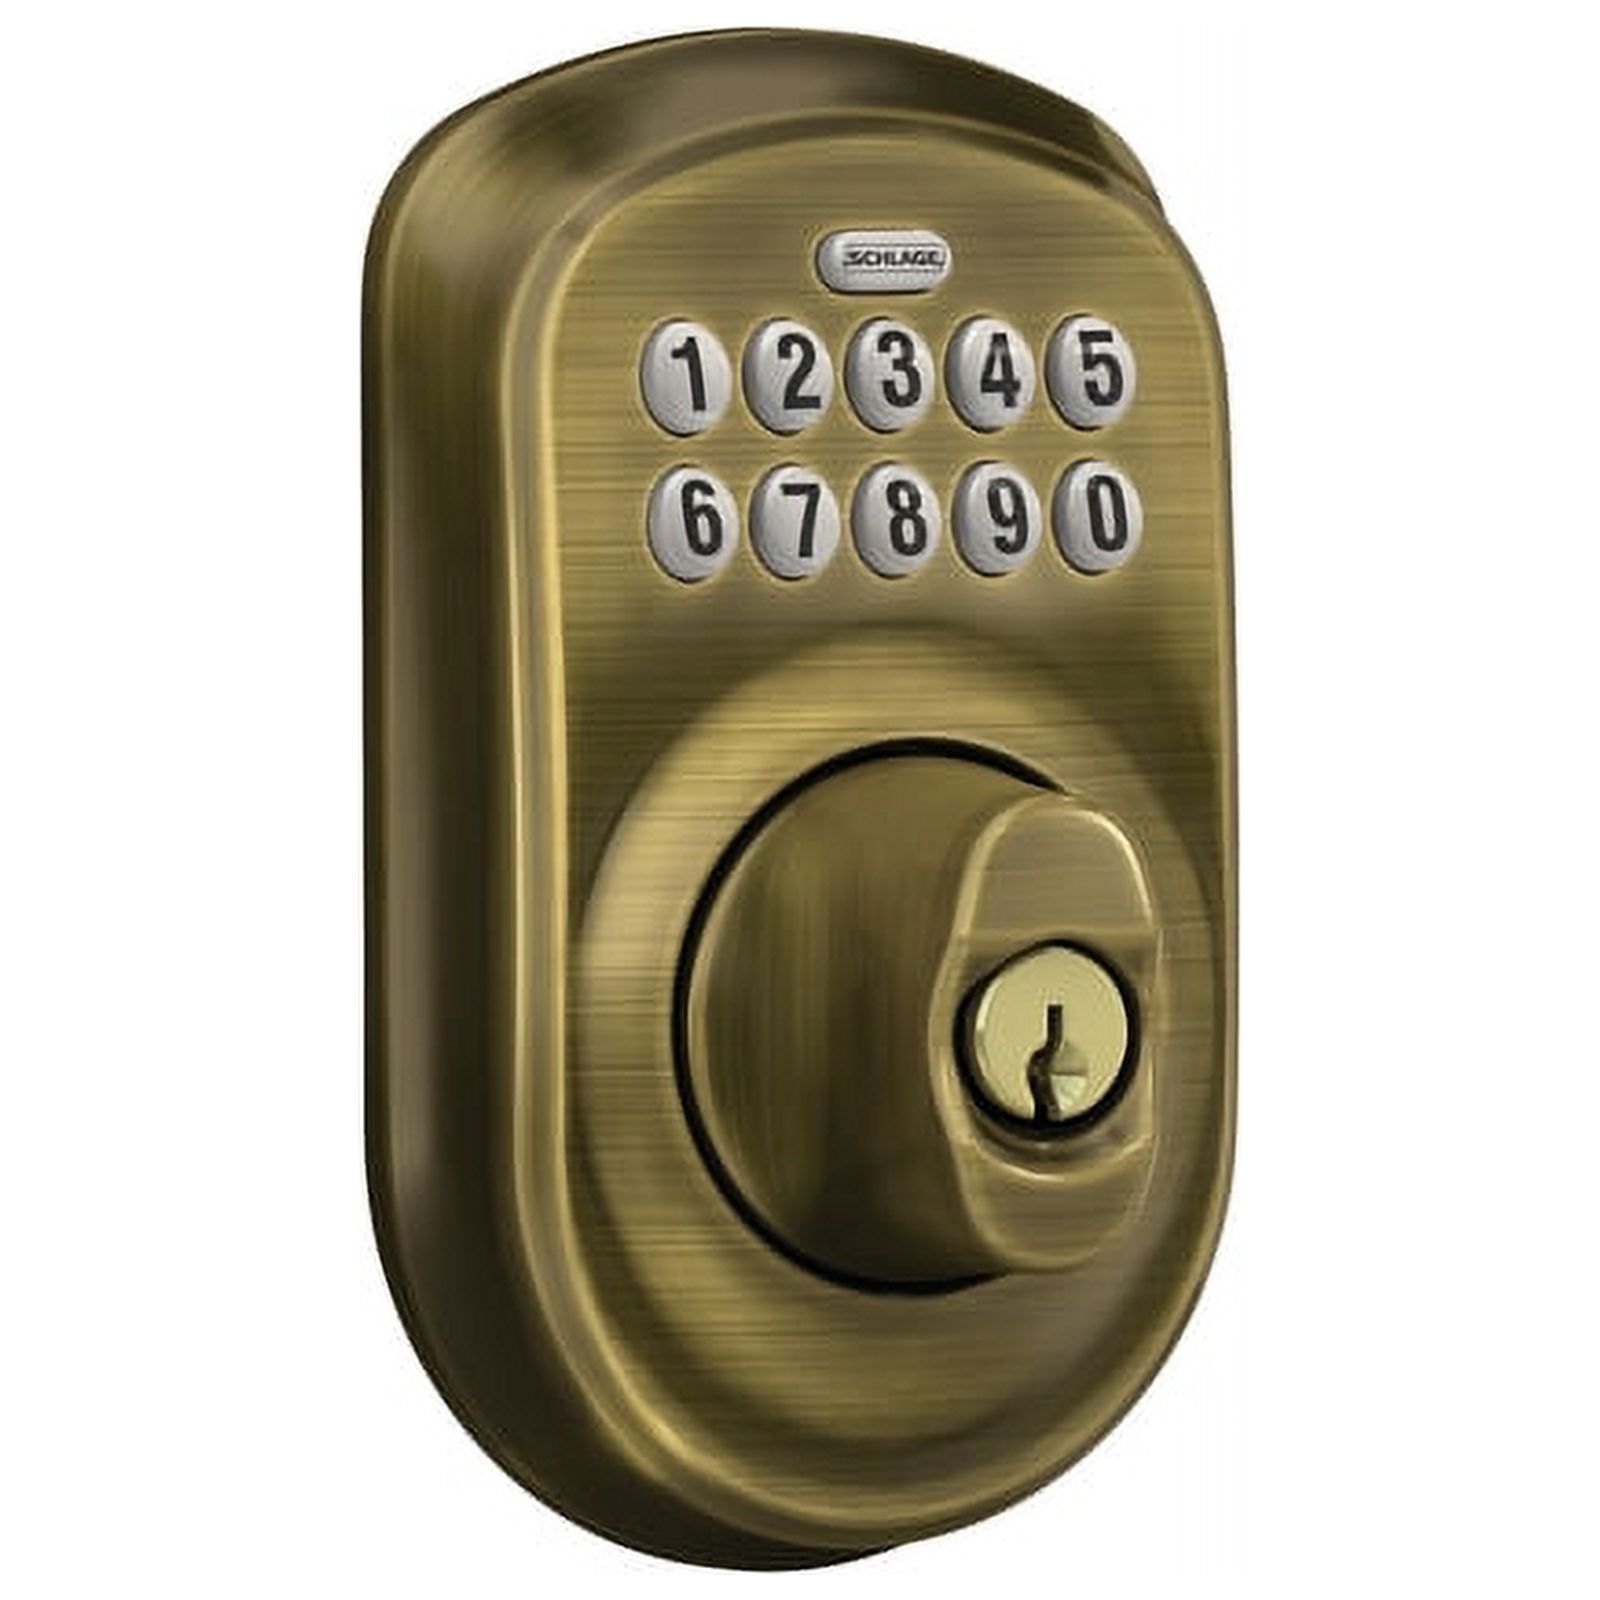 Schlage Antique Brass Metal Electronic Keypad Entry Lock - image 1 of 2